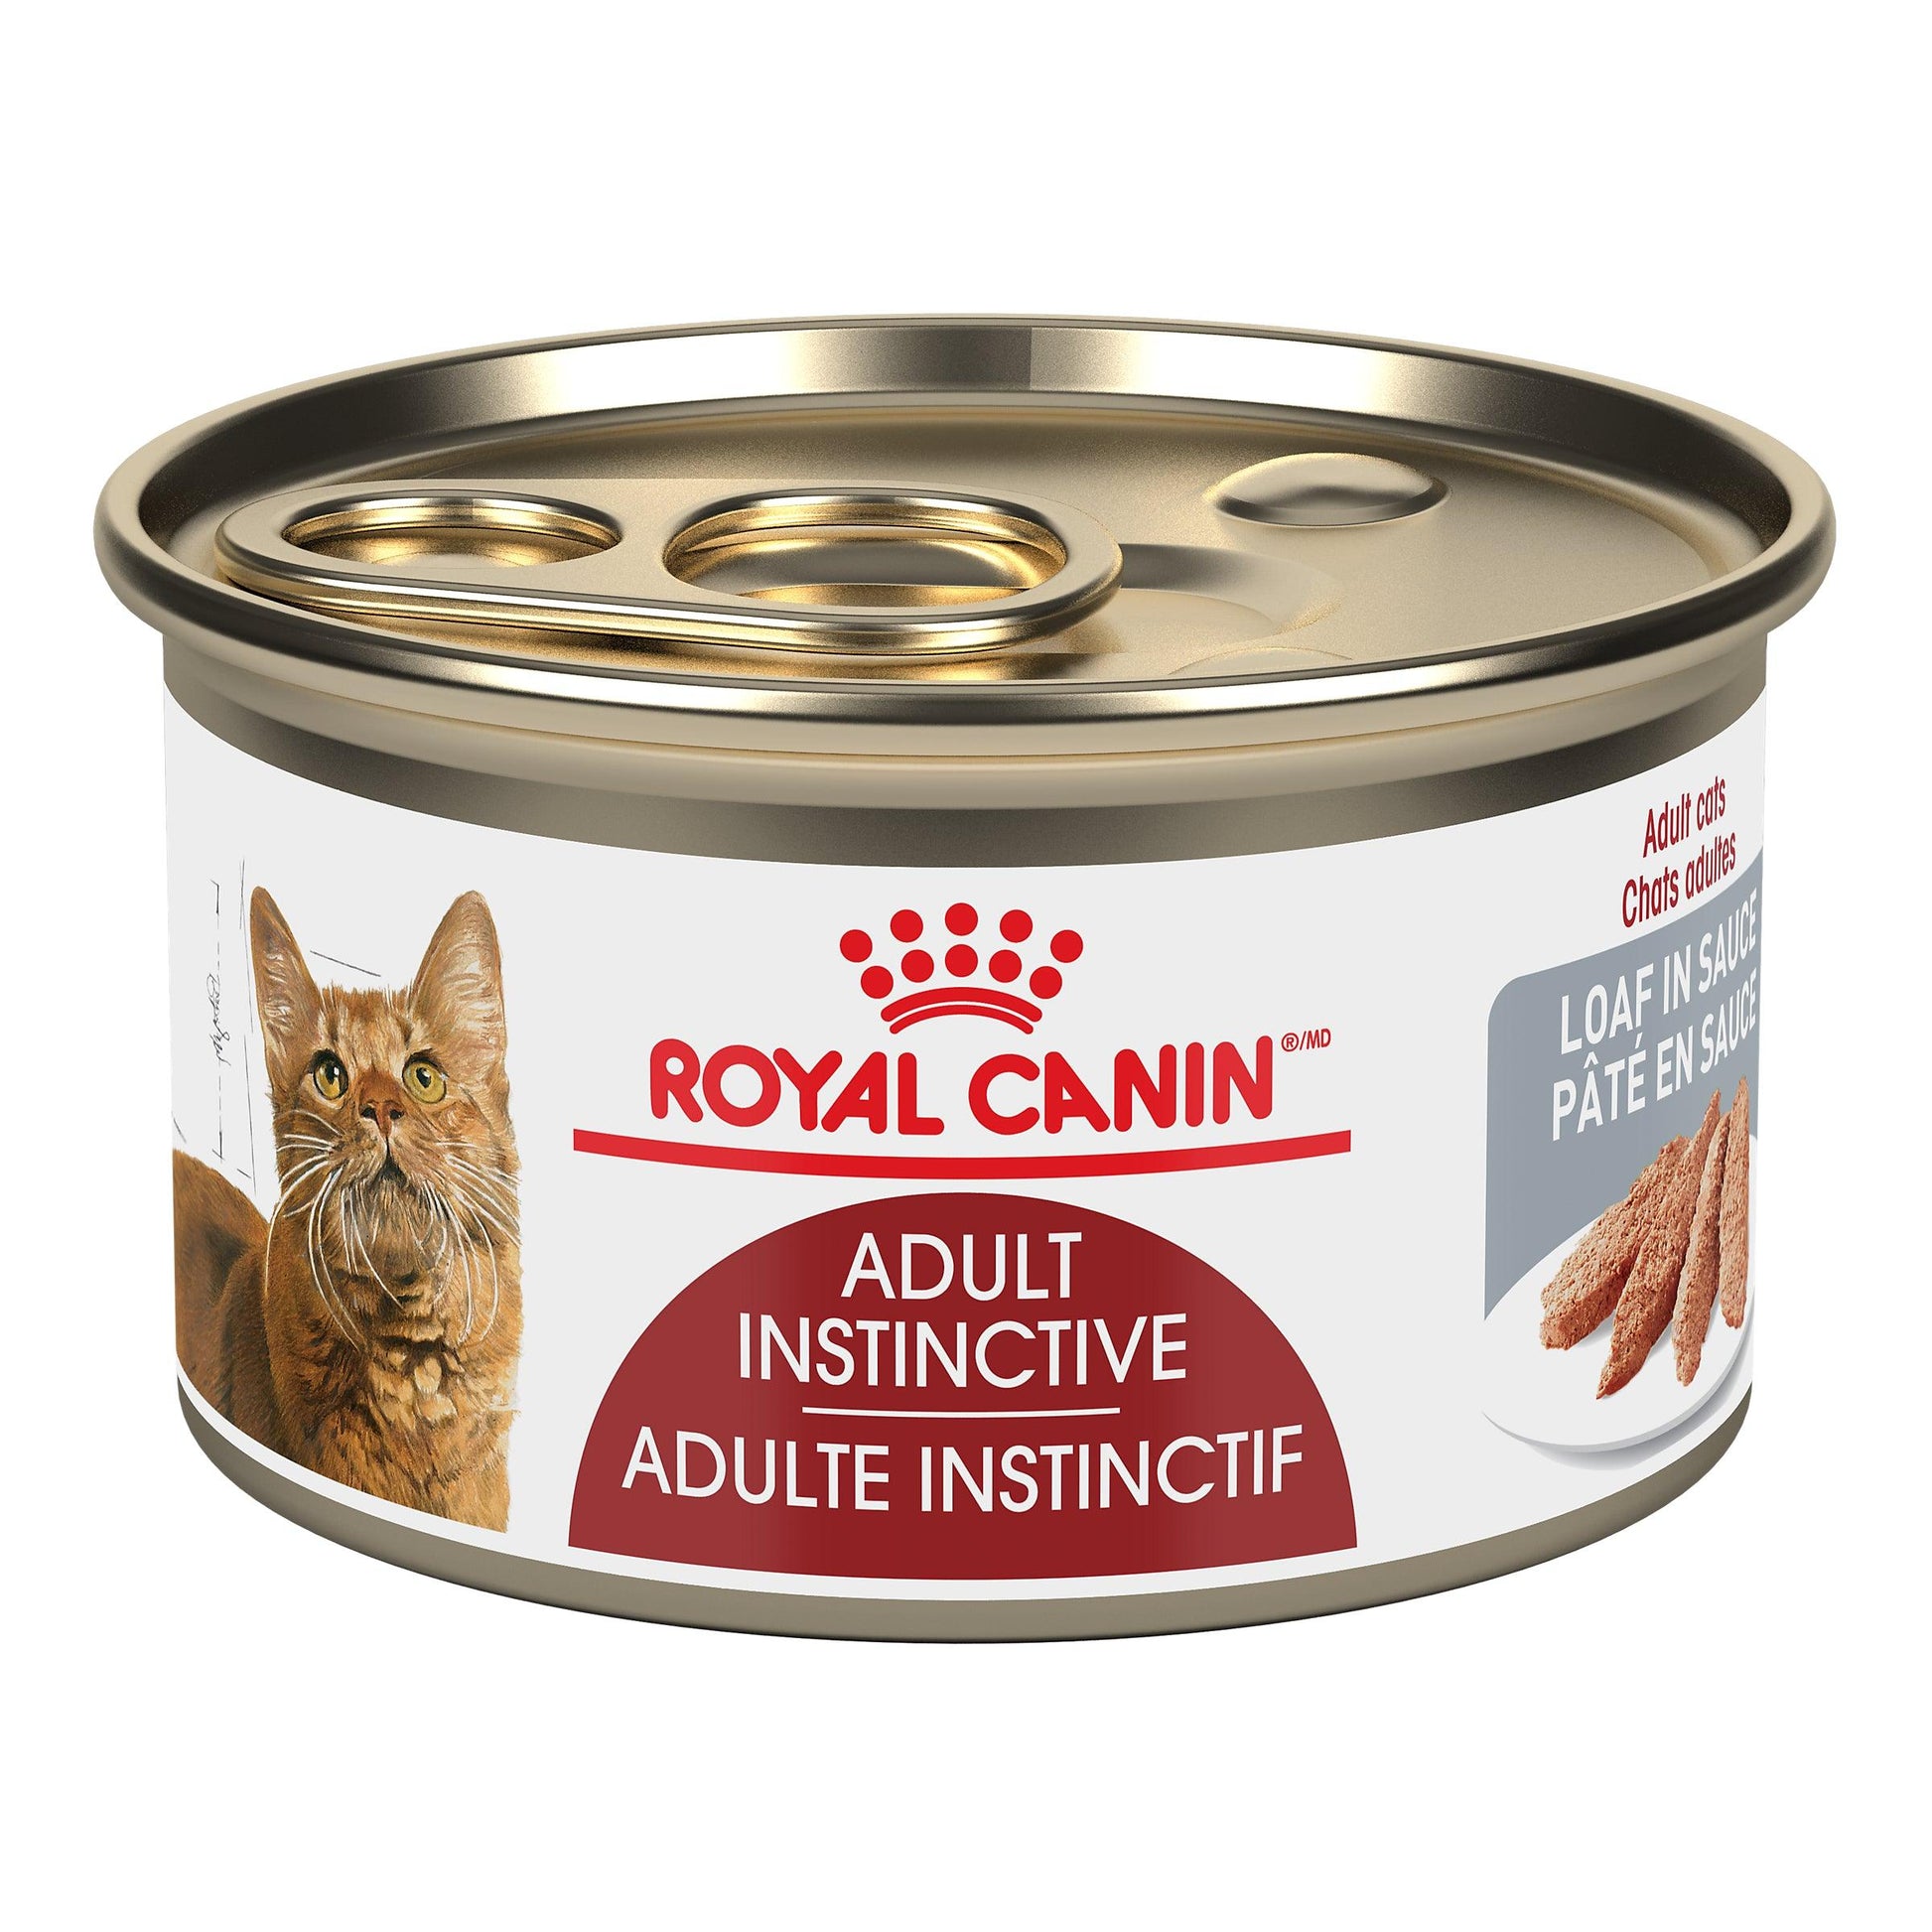 Royal Canin Canned Cat Food Adult Instinctive Loaf In Sauce - 85g / Individual - Canned Cat Food - Royal Canin - PetMax Canada